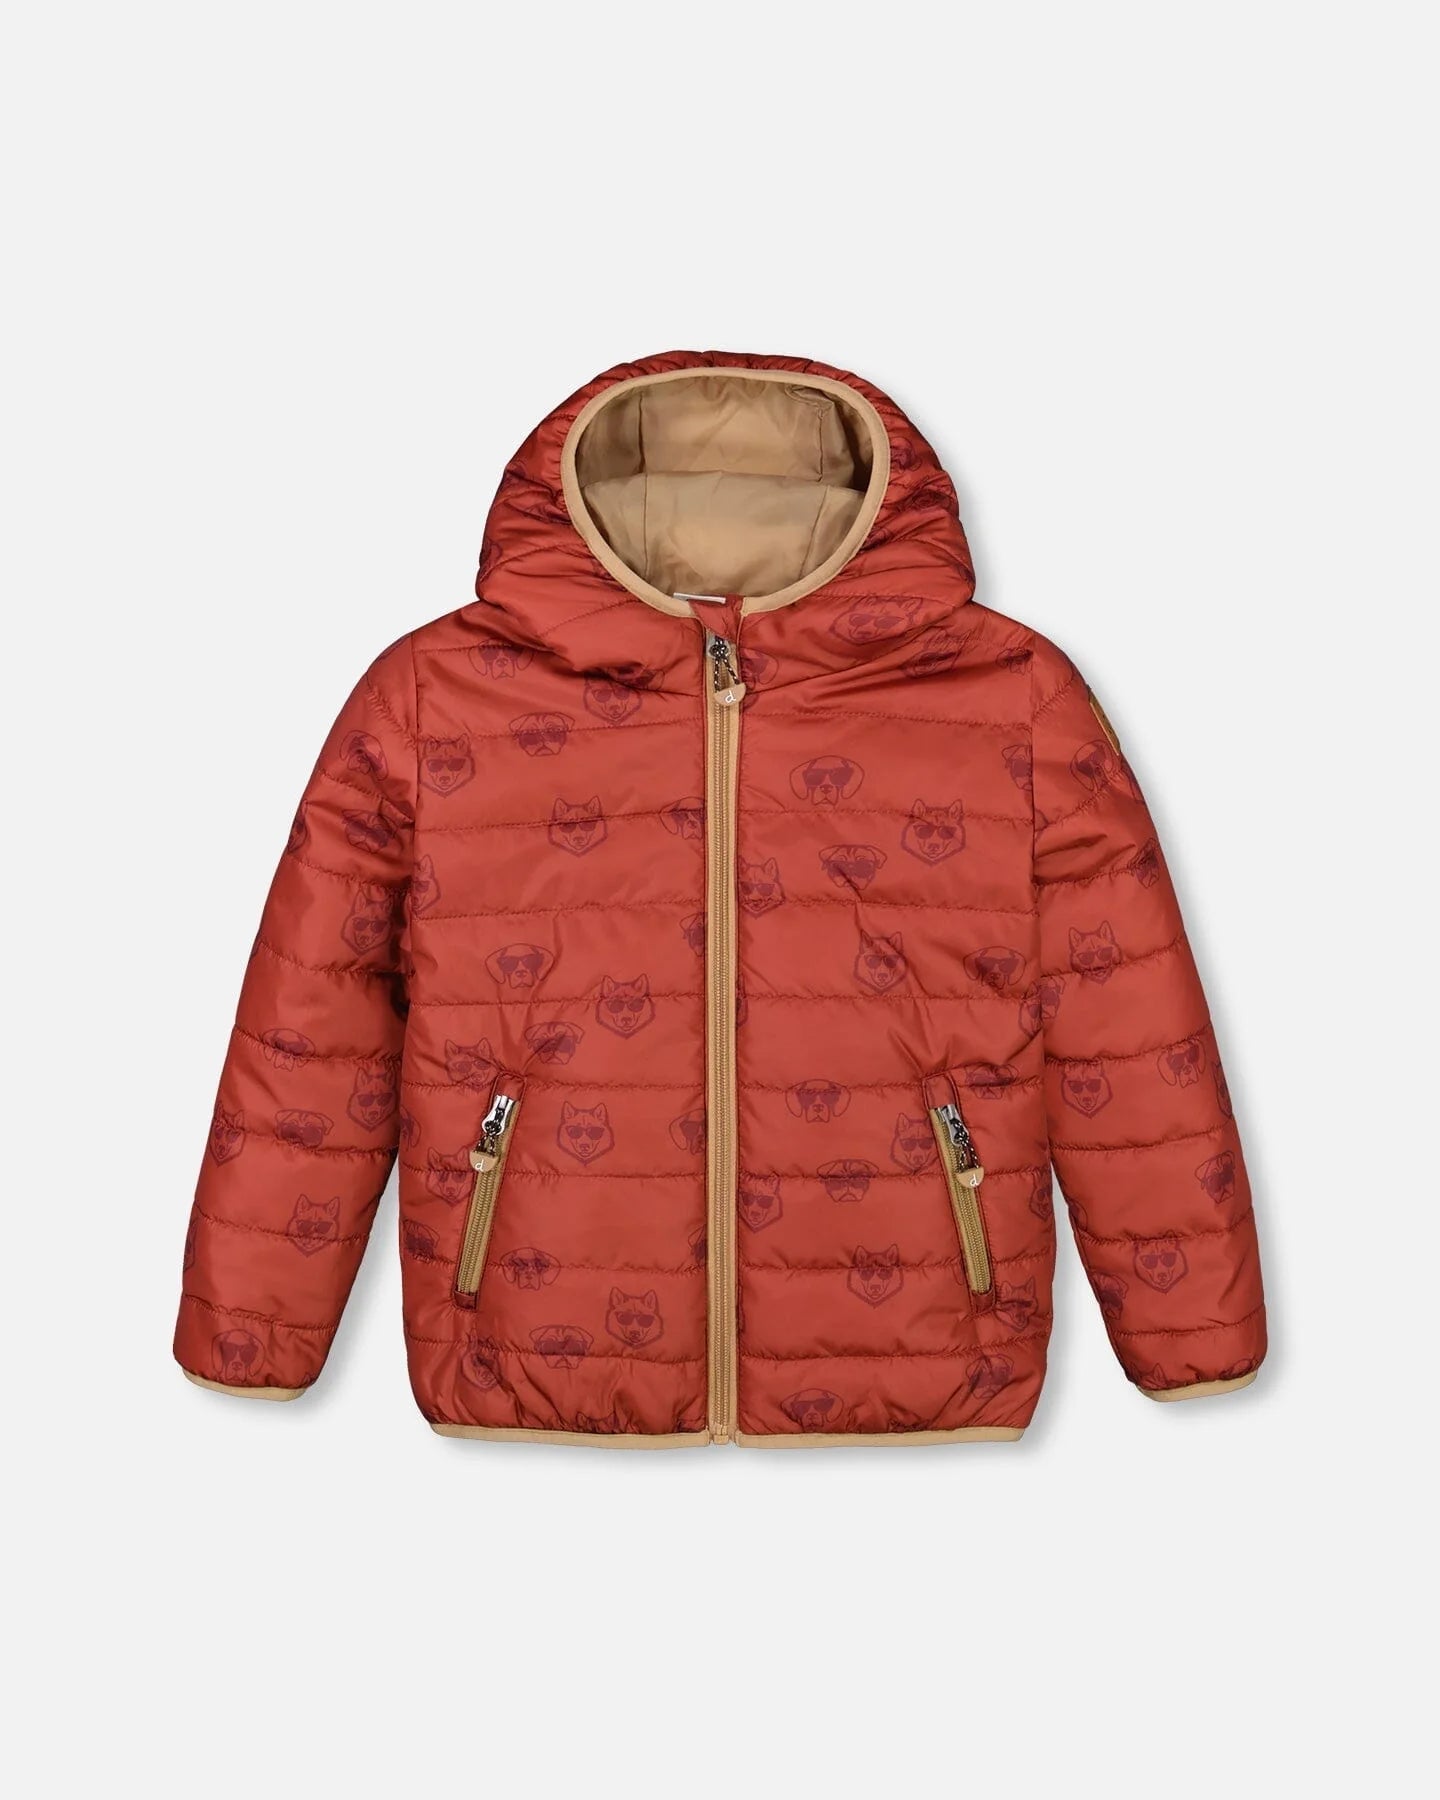 Nano Puff Brick Quilted Kids Jacket - Forests, Tides, and Treasures